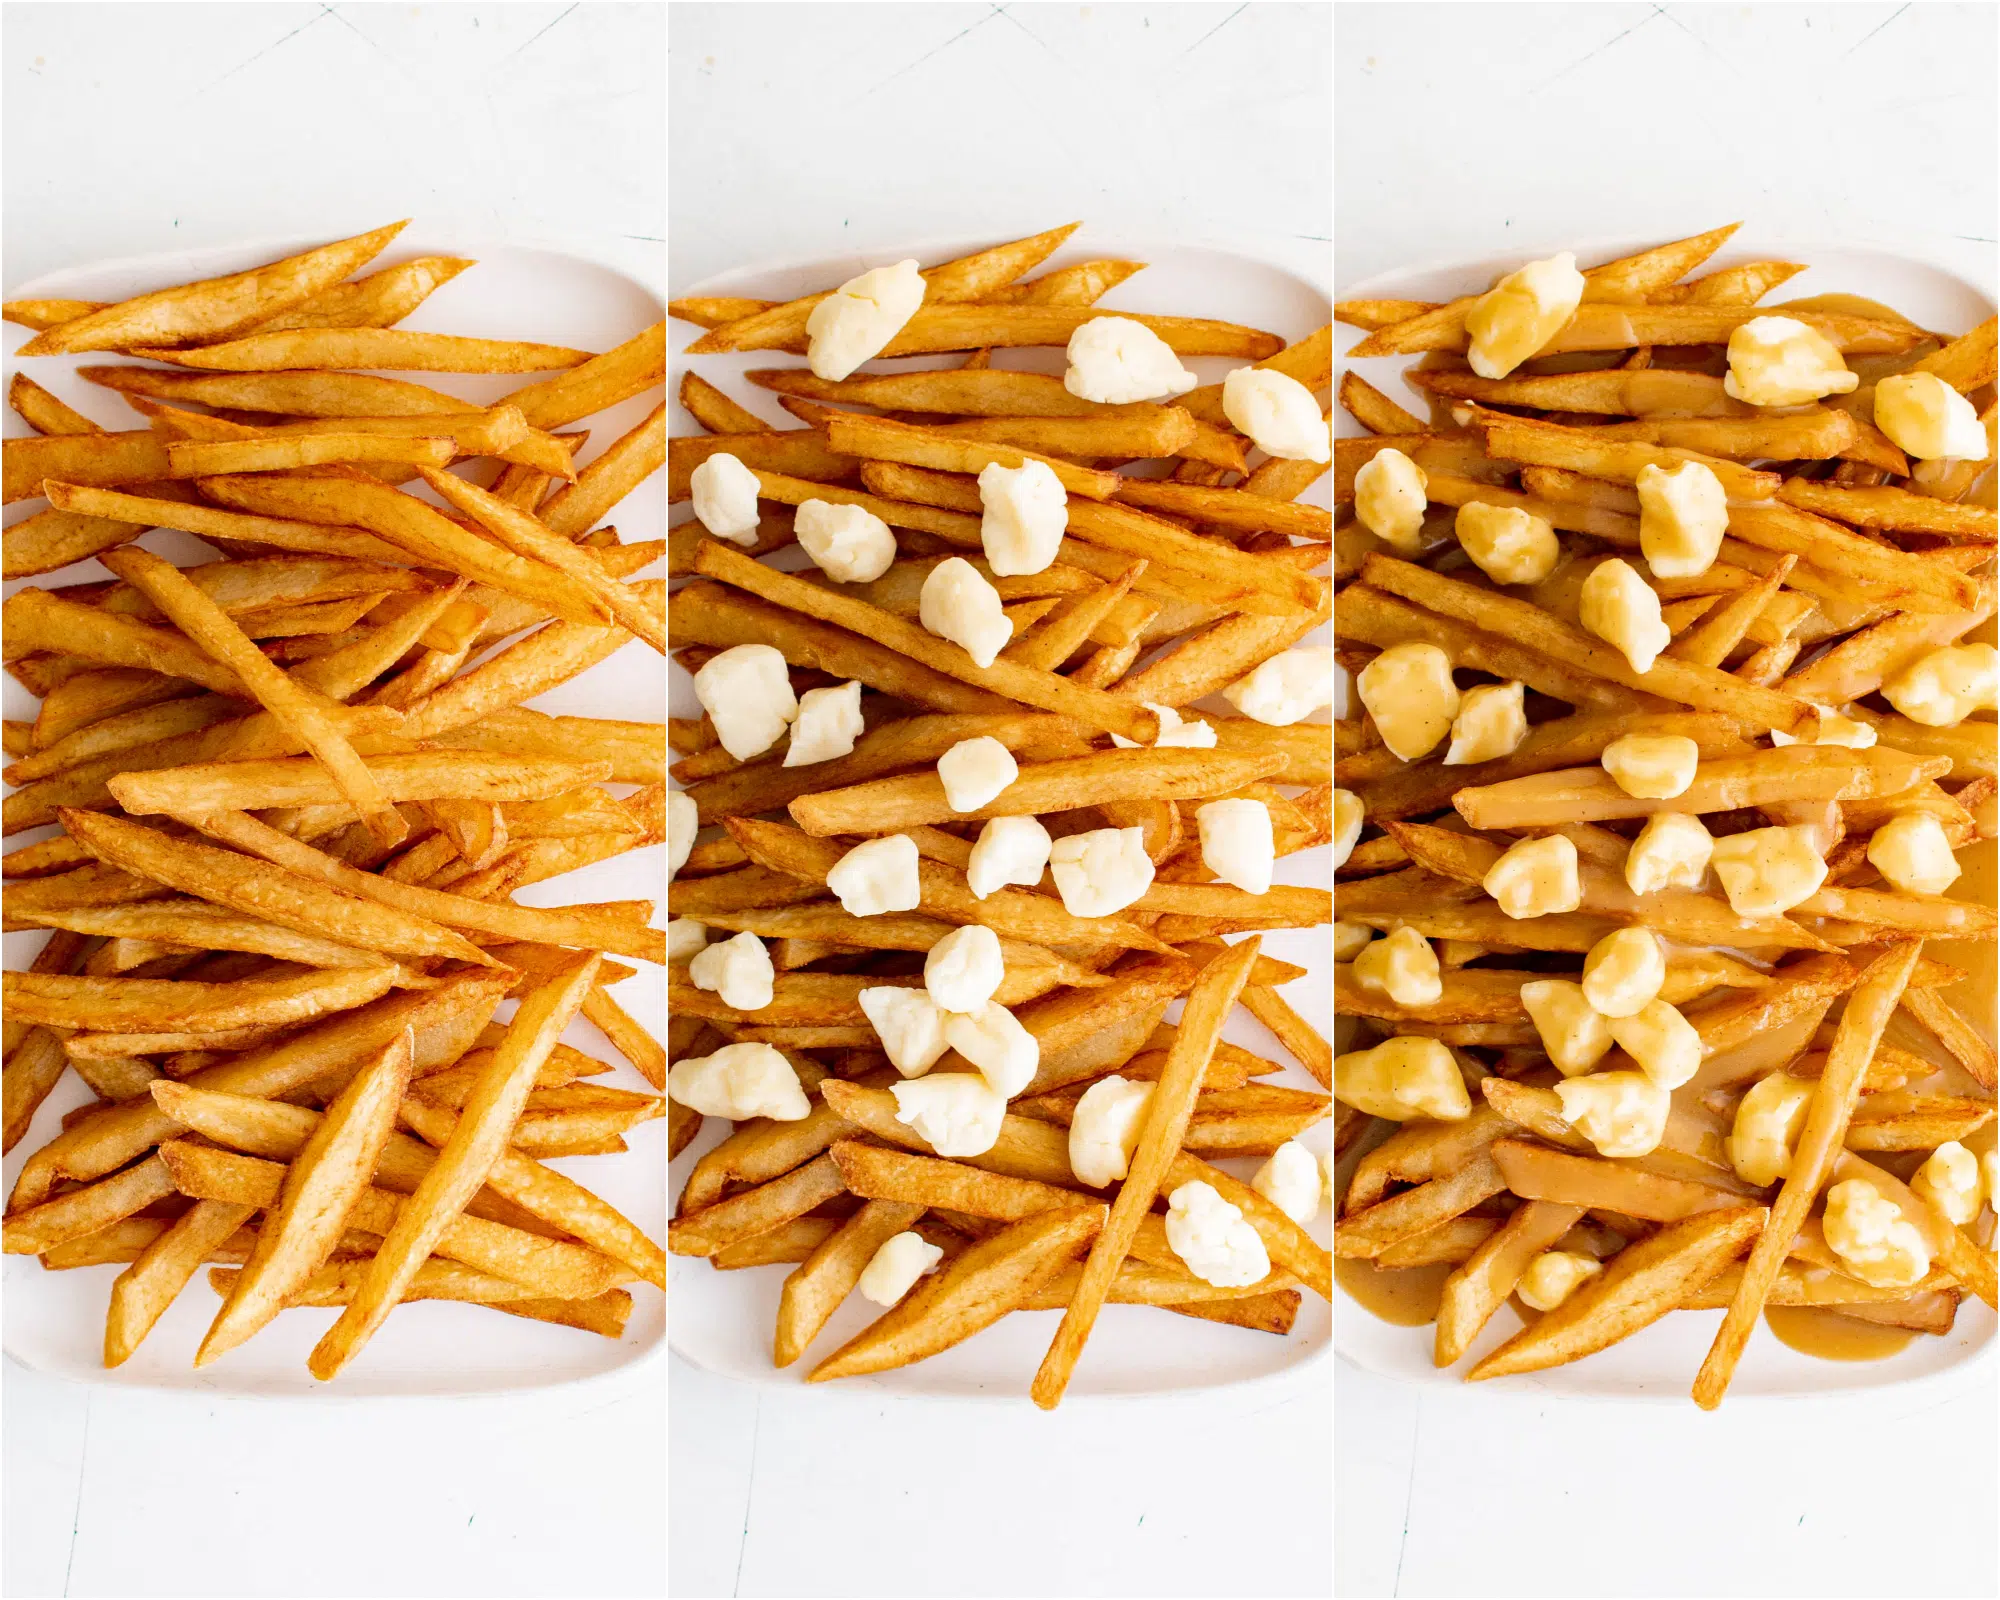 Collage of three images: the first image shows French fries on a white serving plate; the second image shows french fries topped with cheese curds on a white serving plate; the third image shows French fries on a white plate topped with cheese curds and homemade gravy.